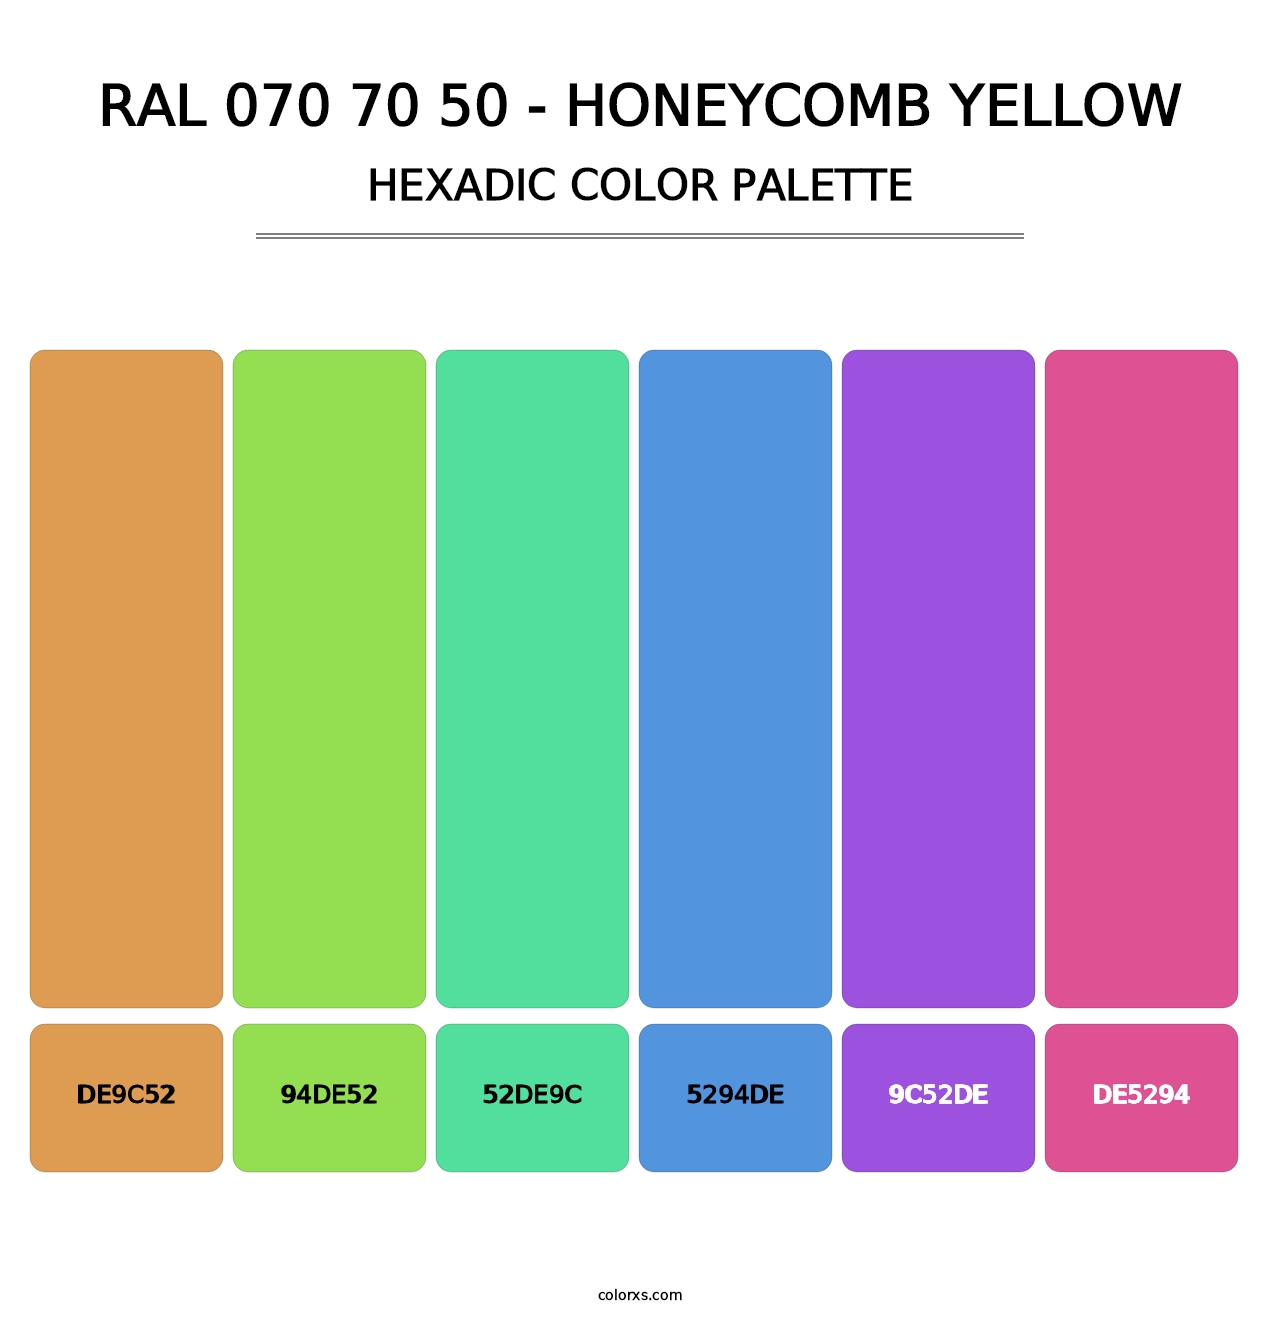 RAL 070 70 50 - Honeycomb Yellow - Hexadic Color Palette